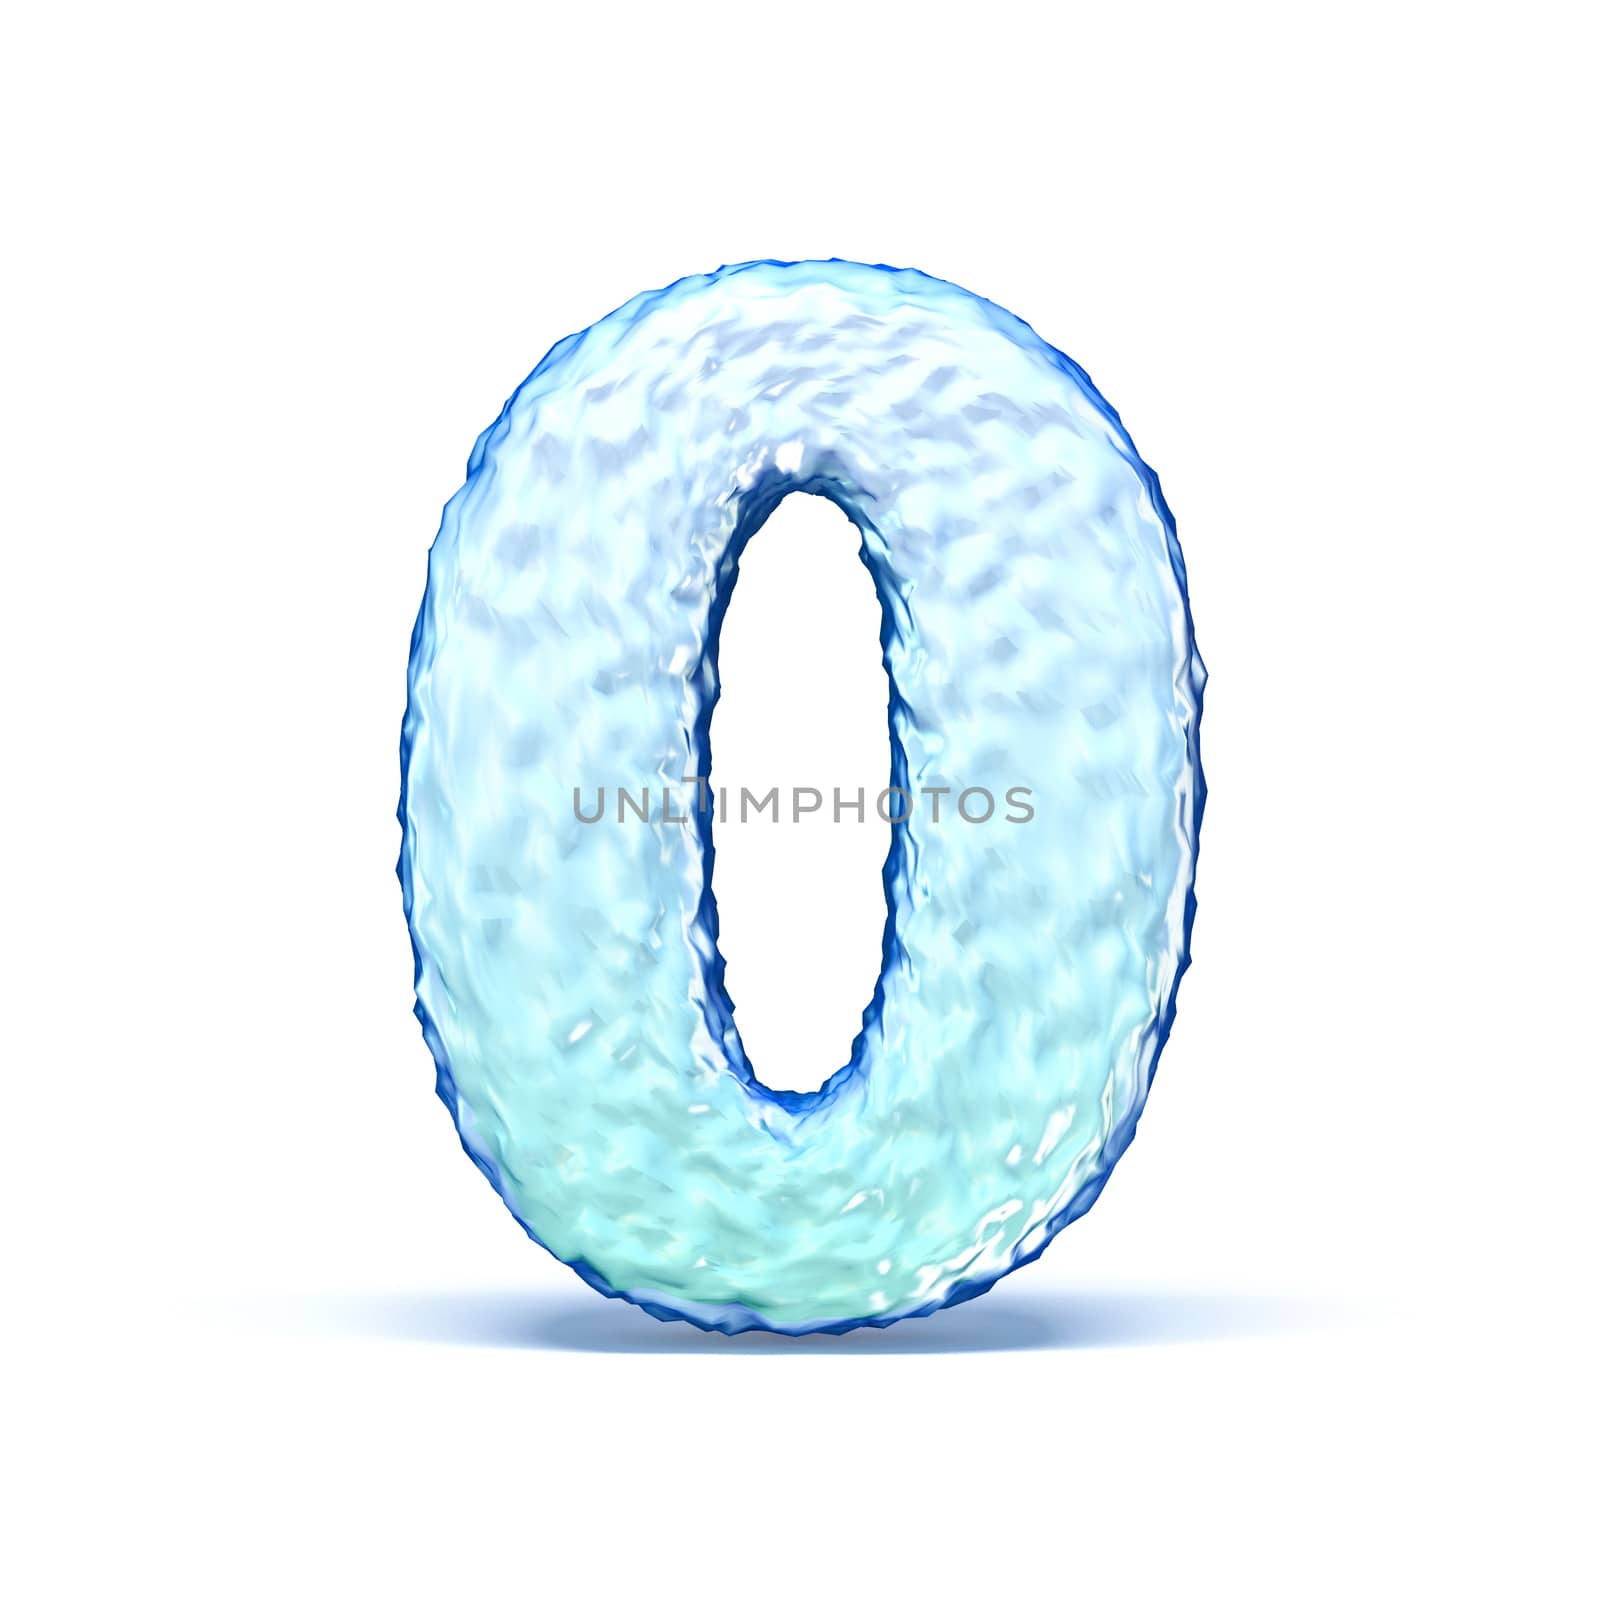 Ice crystal font Number 0 ZERO 3D render illustration isolated on white background